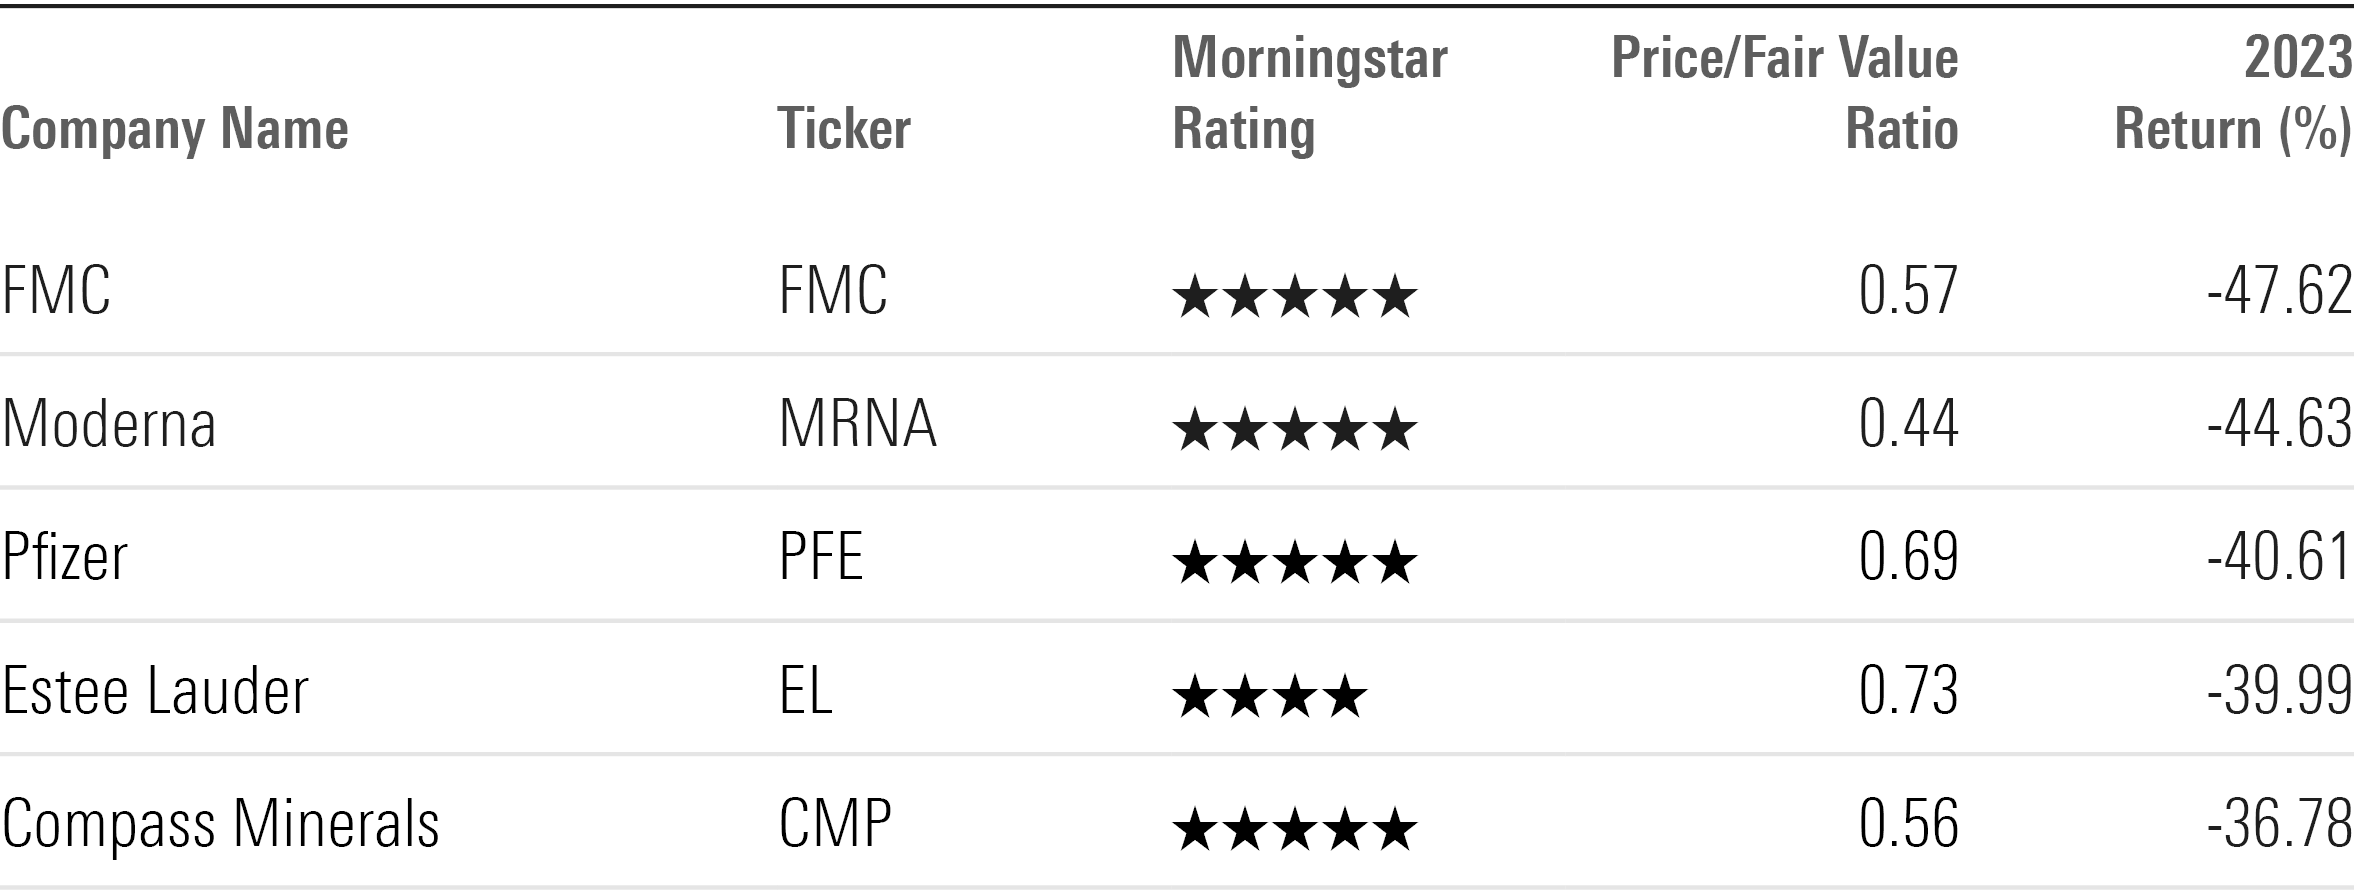 Table showing ticker, Morningstar Rating, price/fair value ratio, and 2023 return for the worst-performing undervalued stocks of 2023.